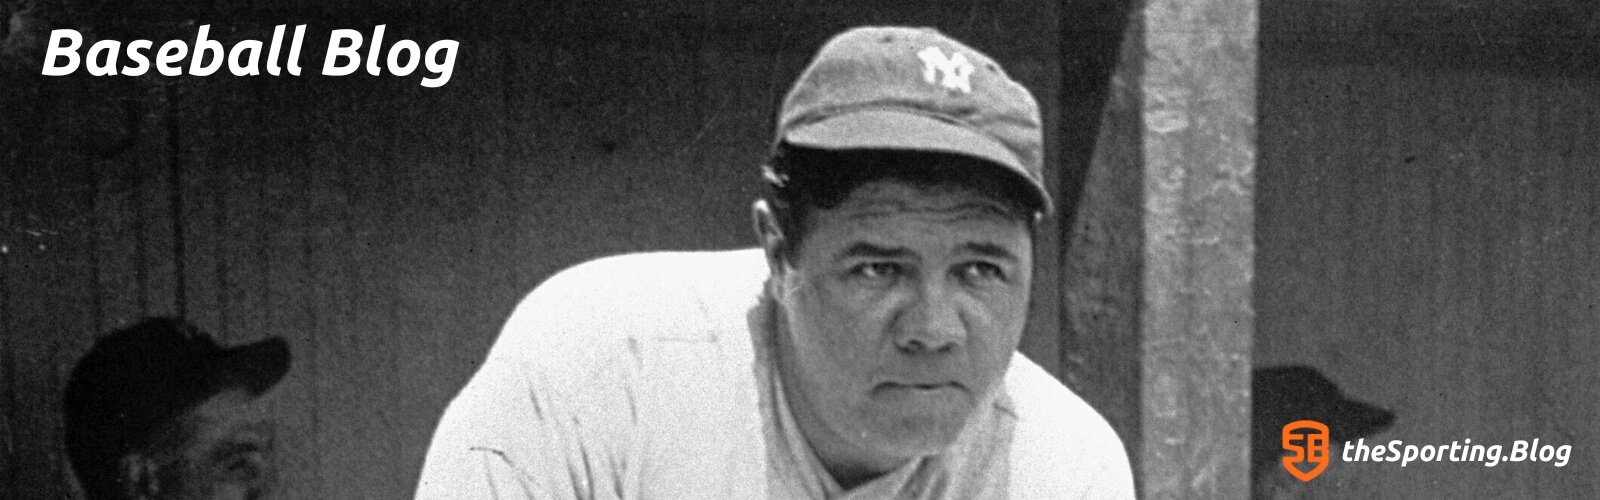 Babe Ruth looking out onto the baseball field